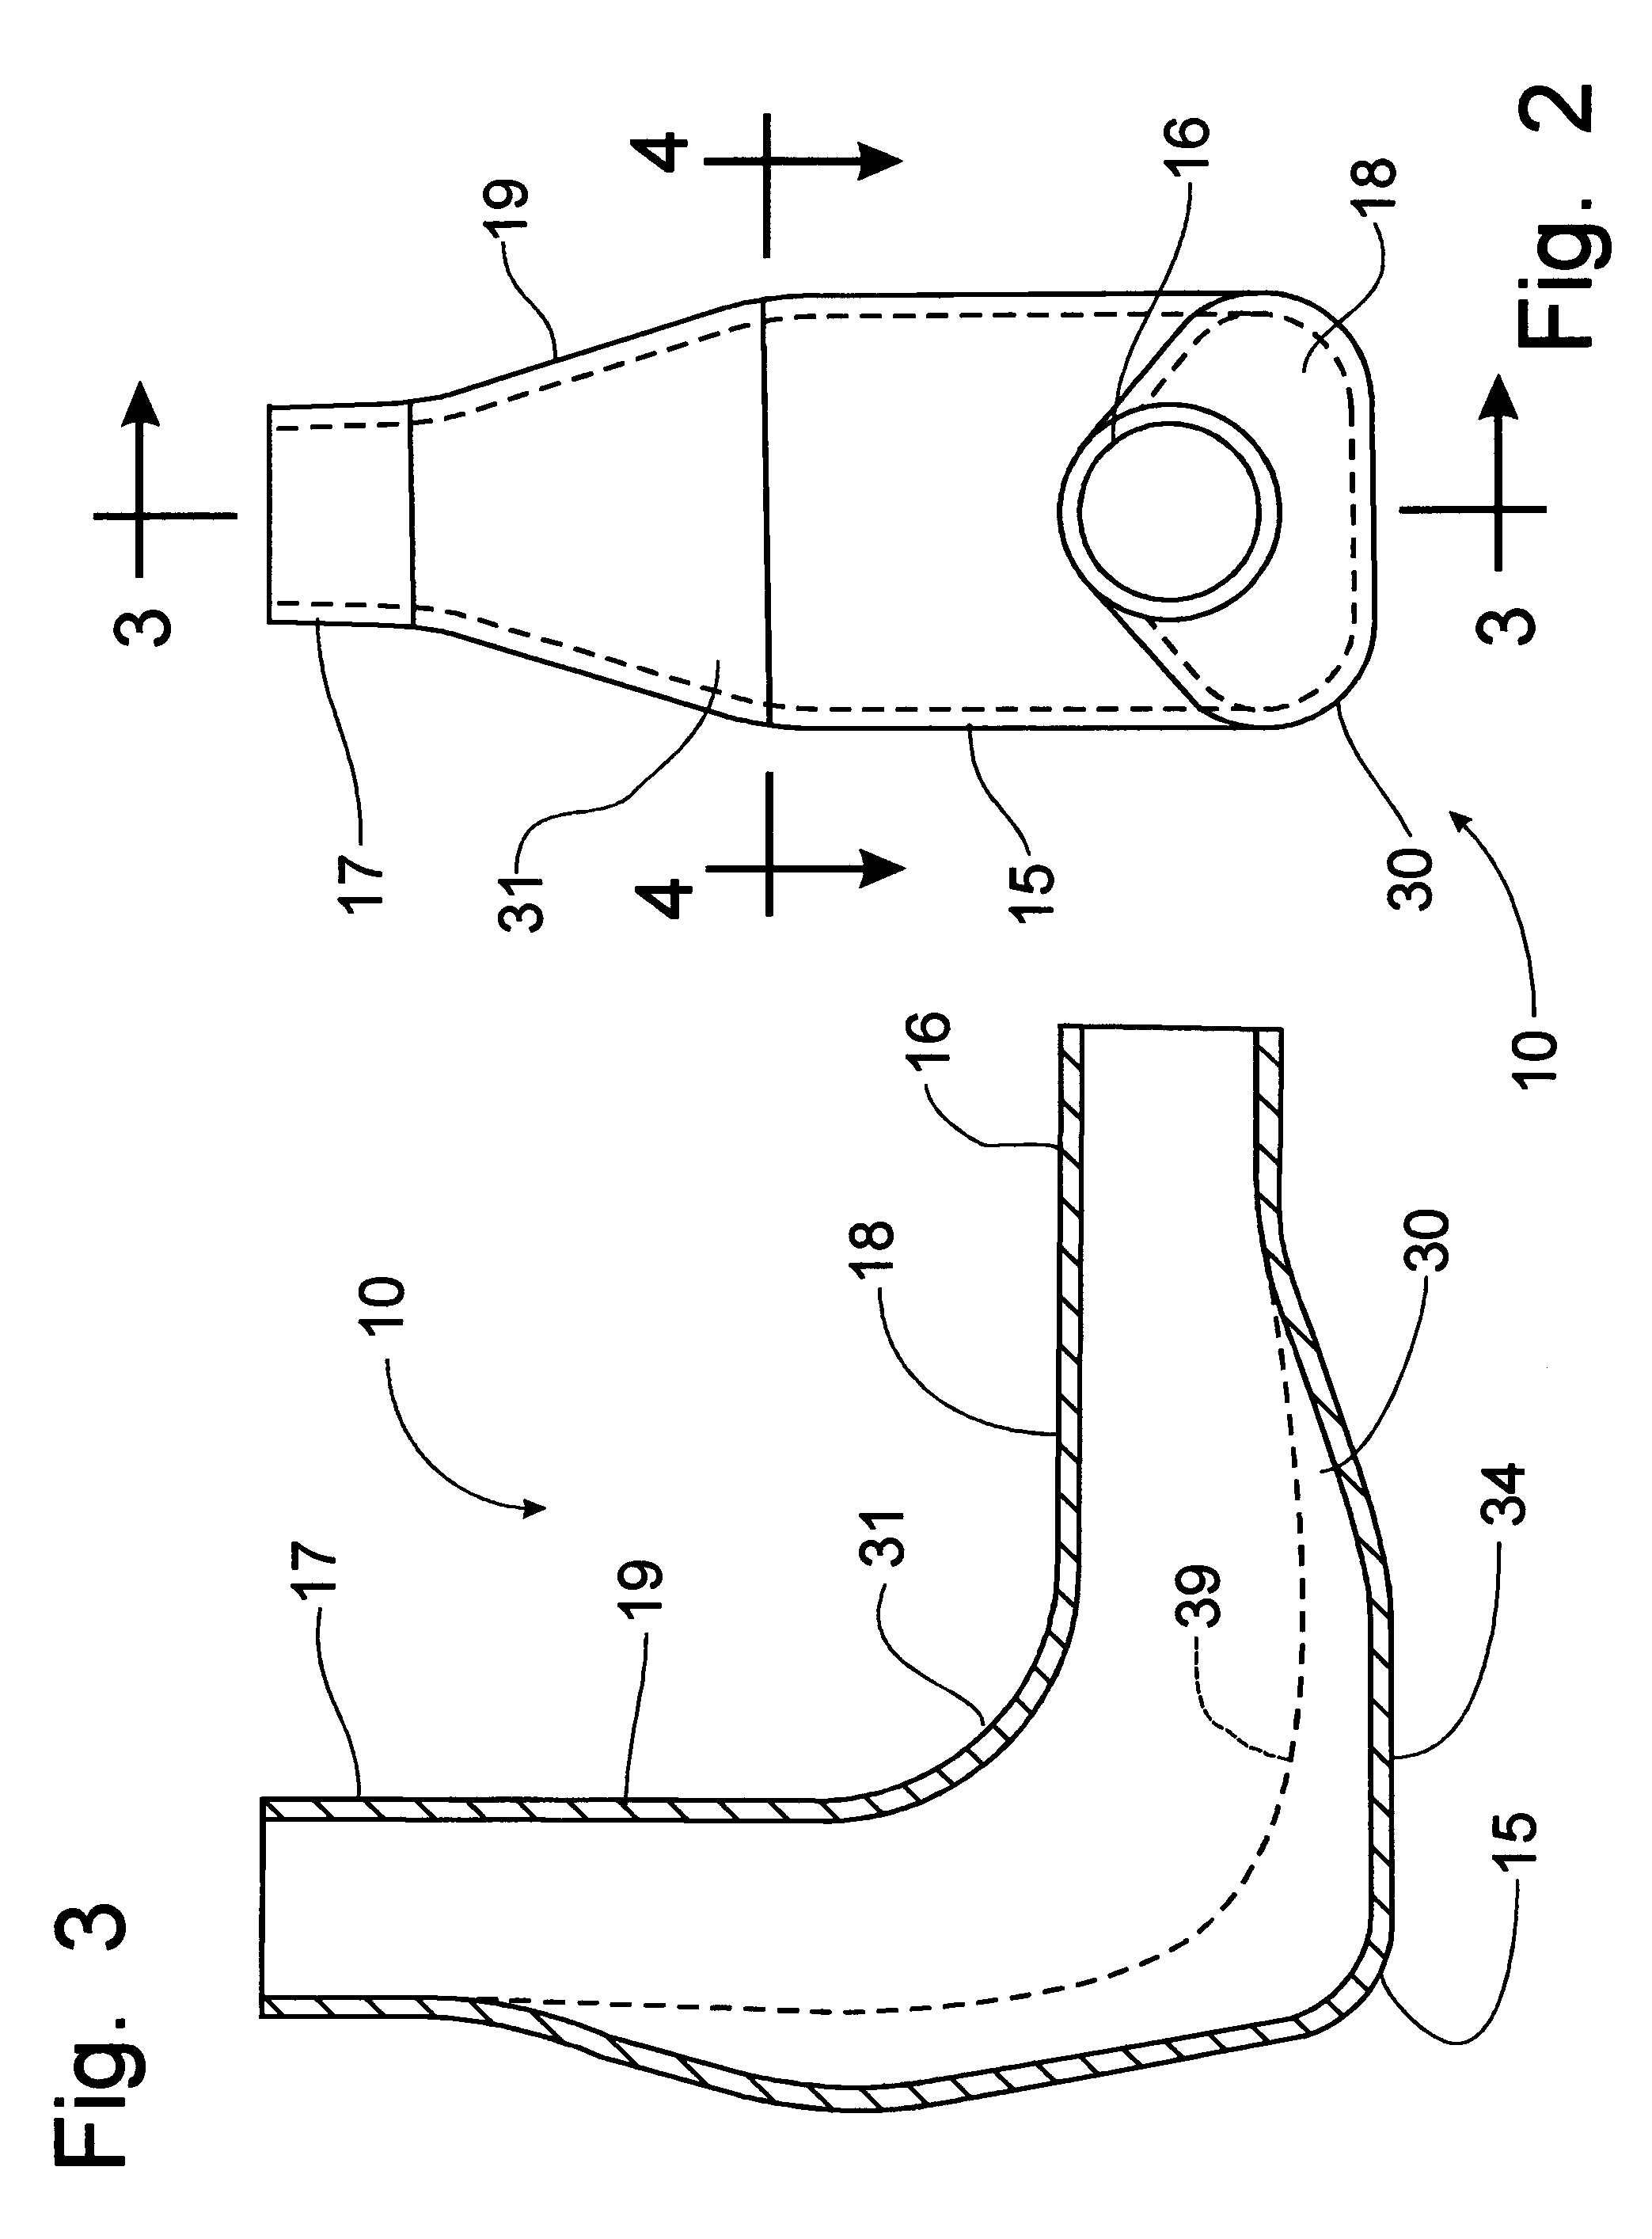 Elbow fitting for pneumatic transport system